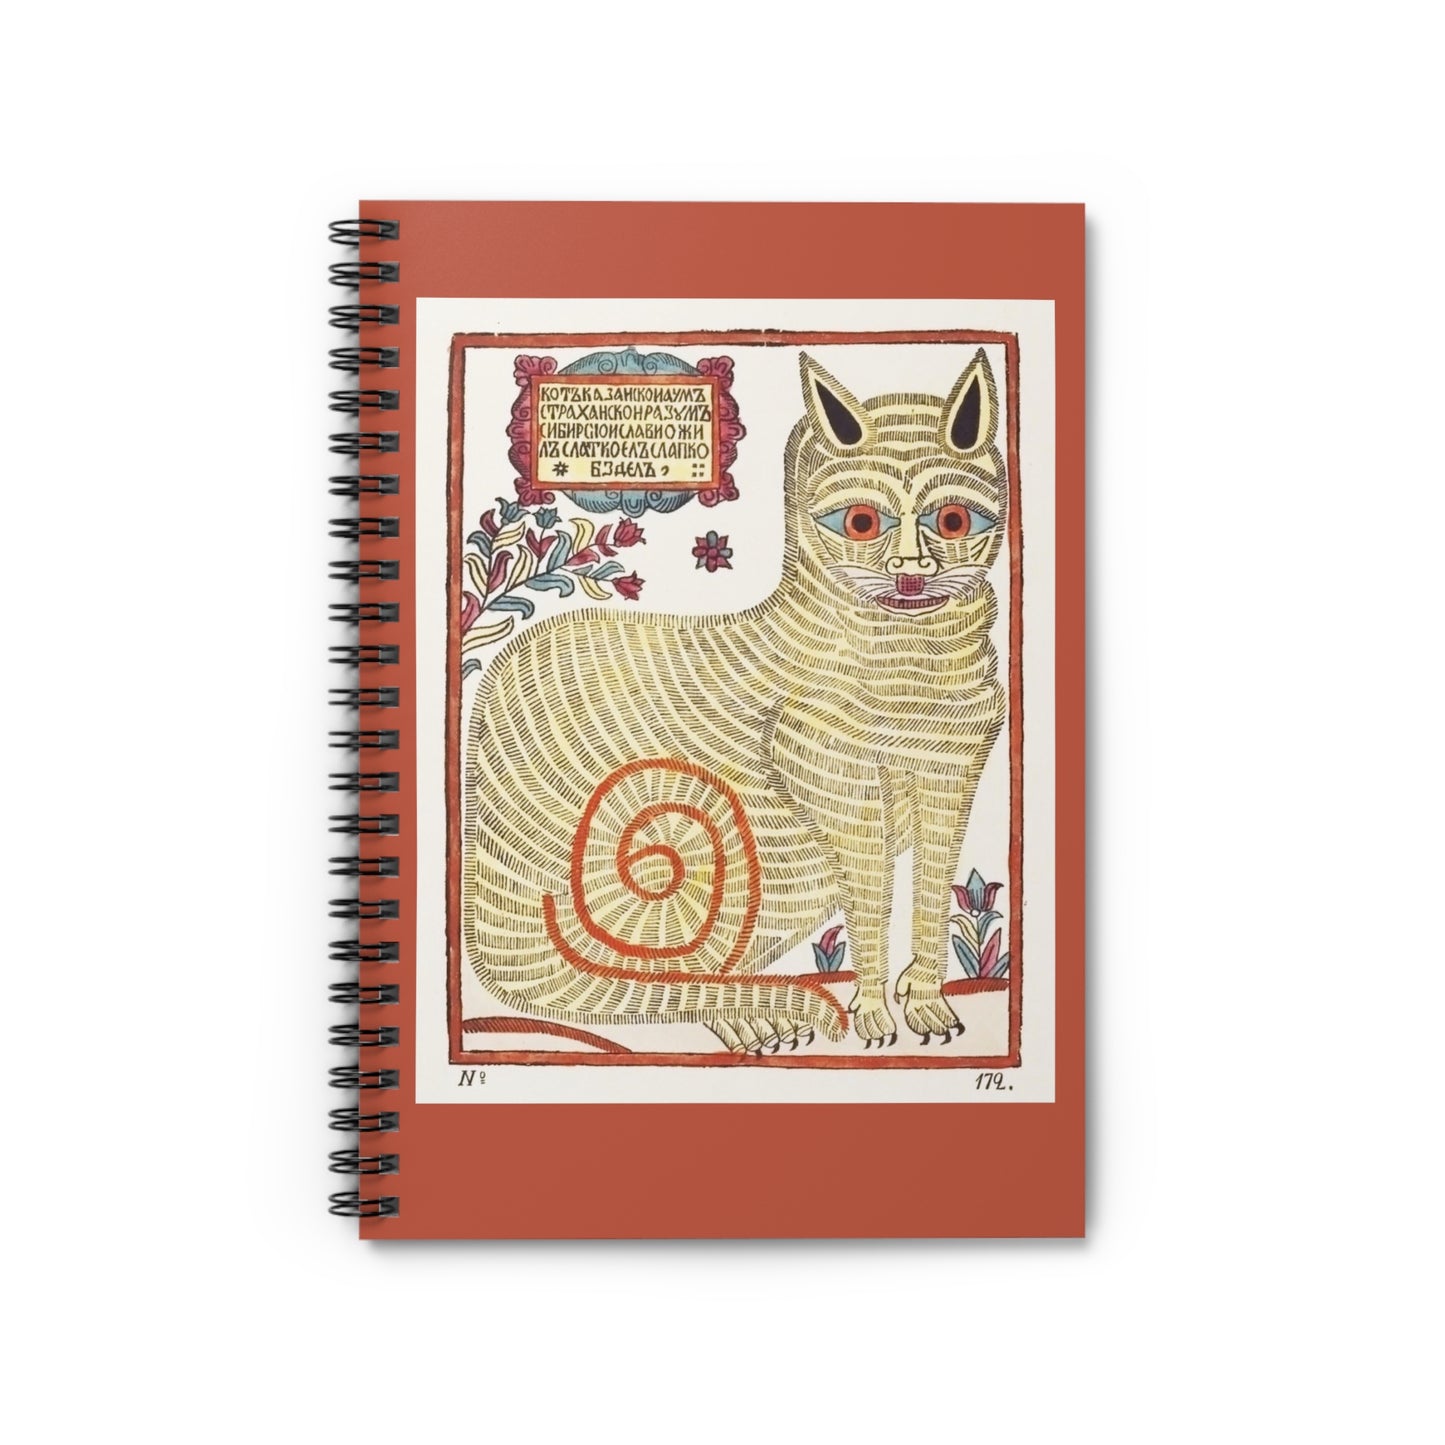 Spiral notebook with an illustration of a stylized cat from the 18th century Russian satire "Cat of Kazan", with a terra cotta colored border.